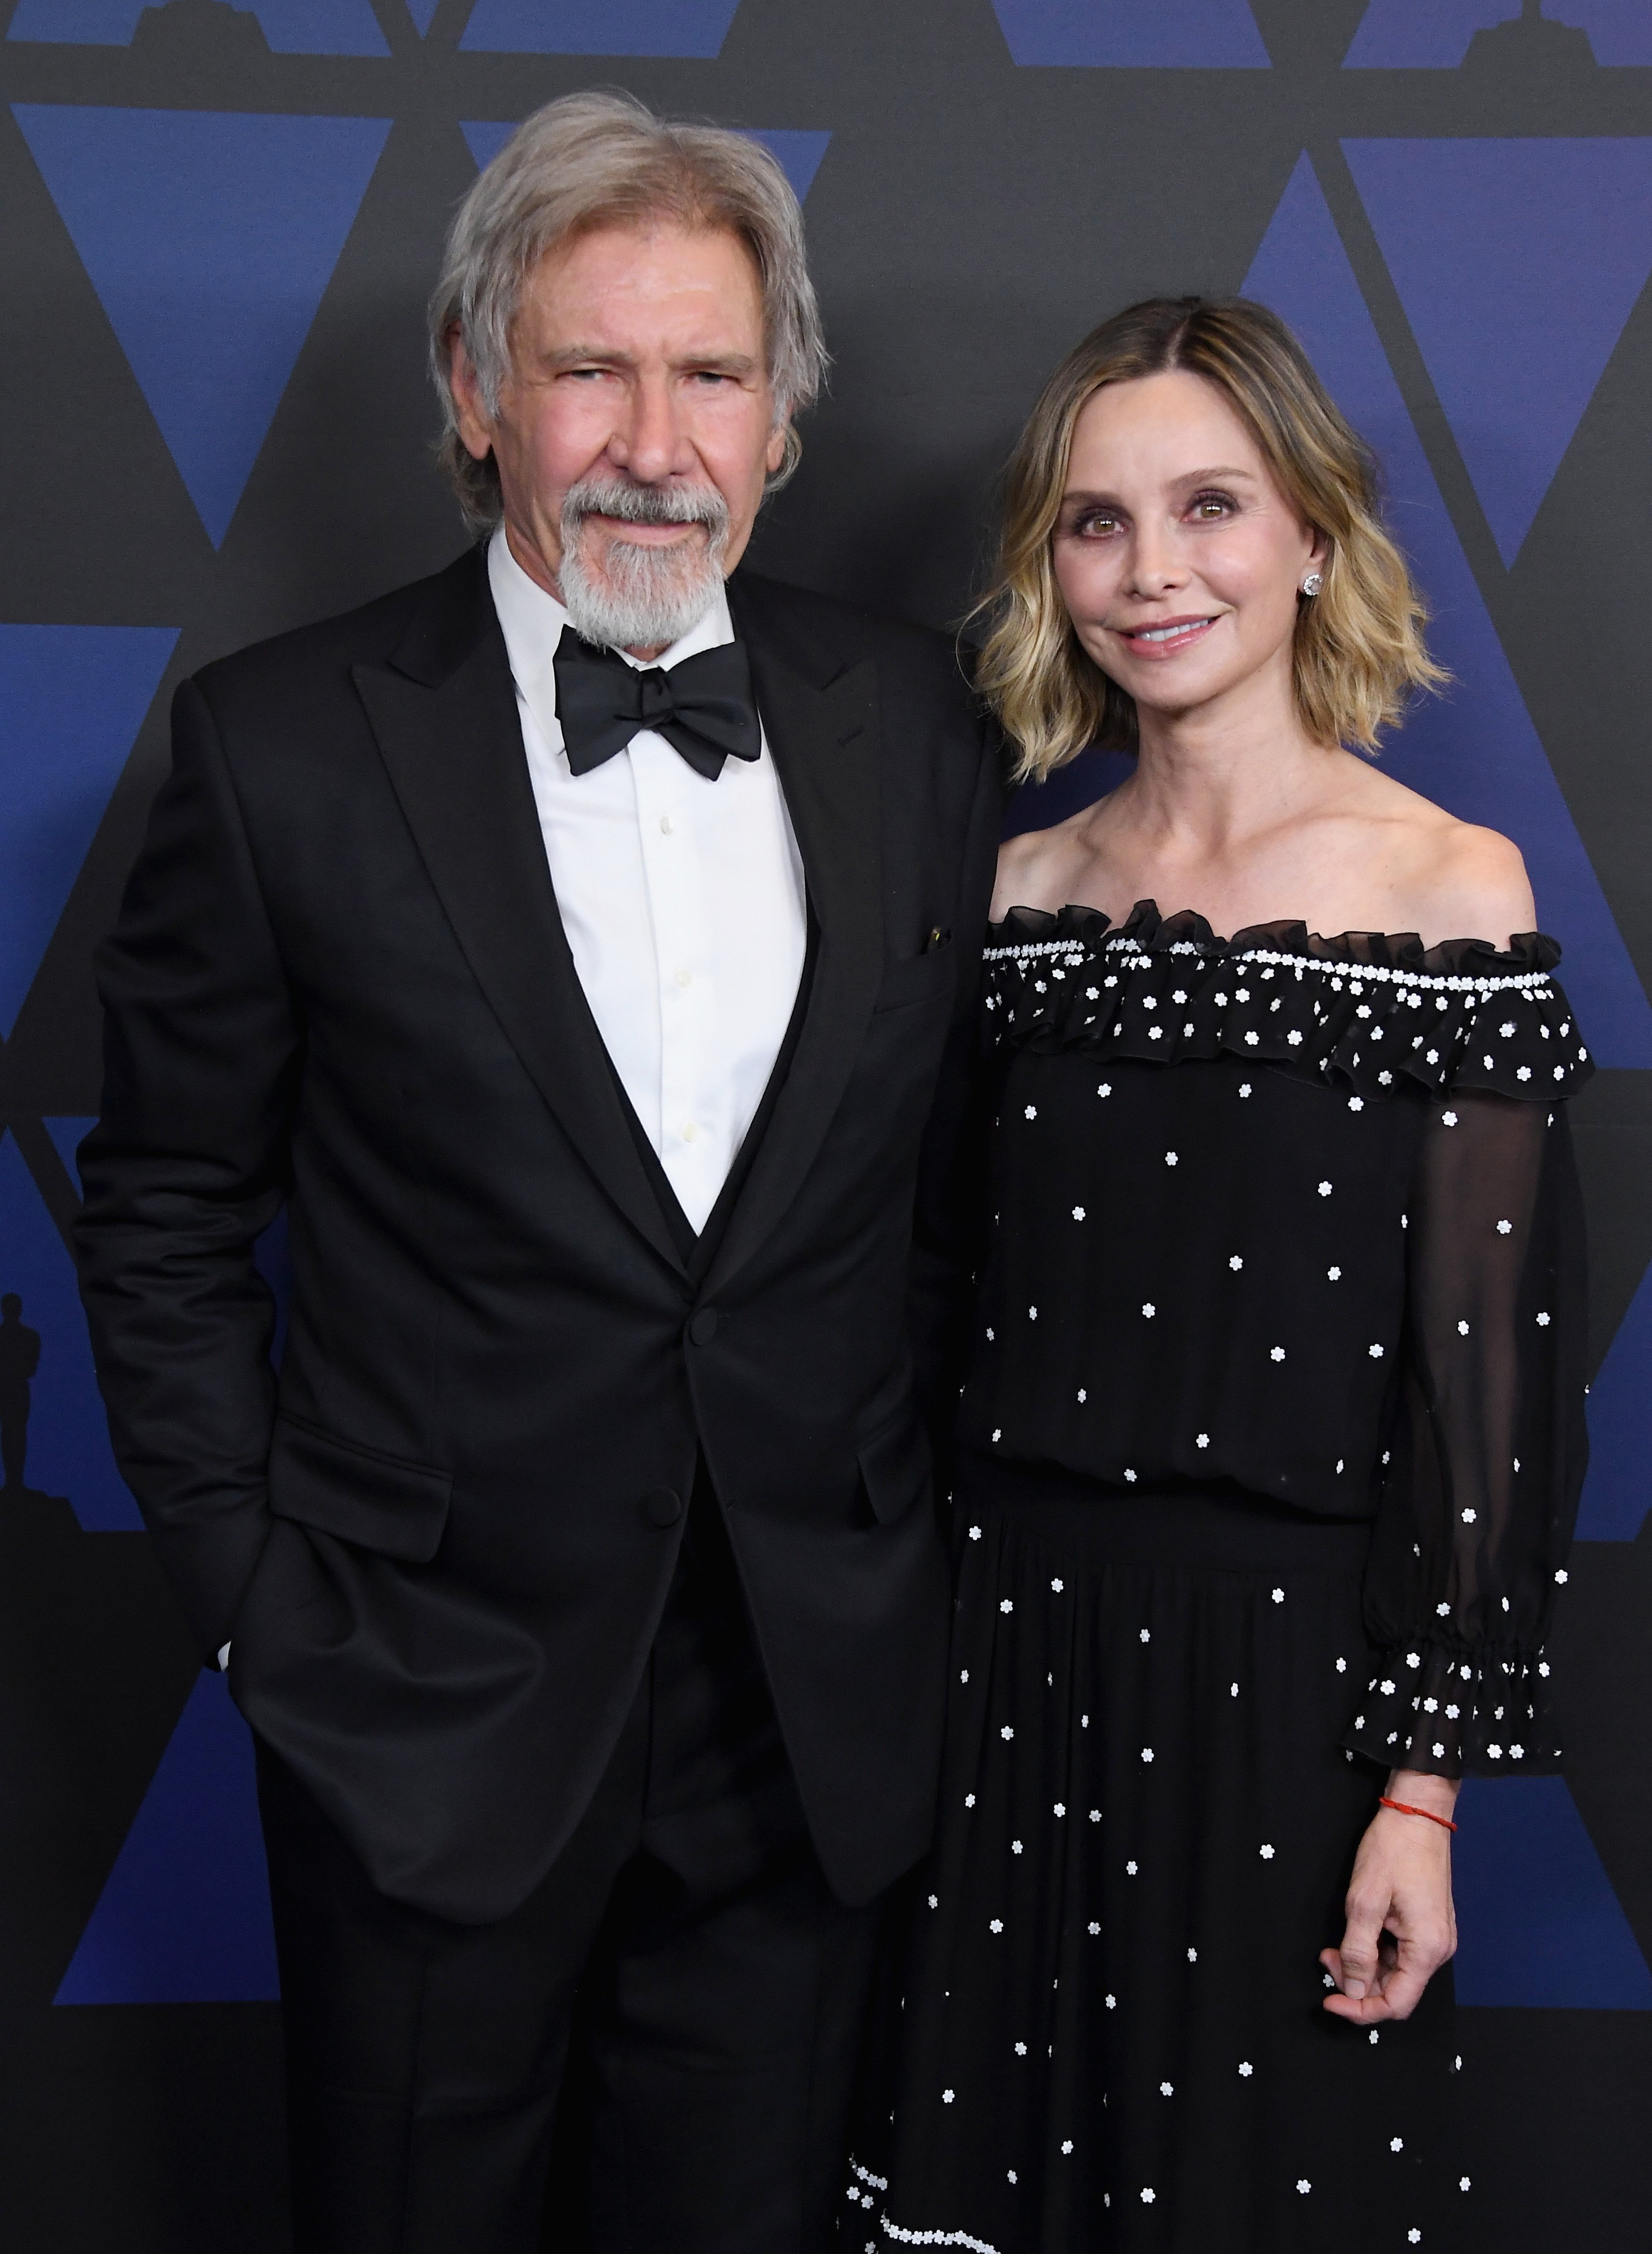 Harrison Ford and Calista Flockhart at the Academy of Motion Picture Arts and Sciences' 10th annual Governors Awards on November 18, 2018, in Hollywood, California | Source: Getty Images